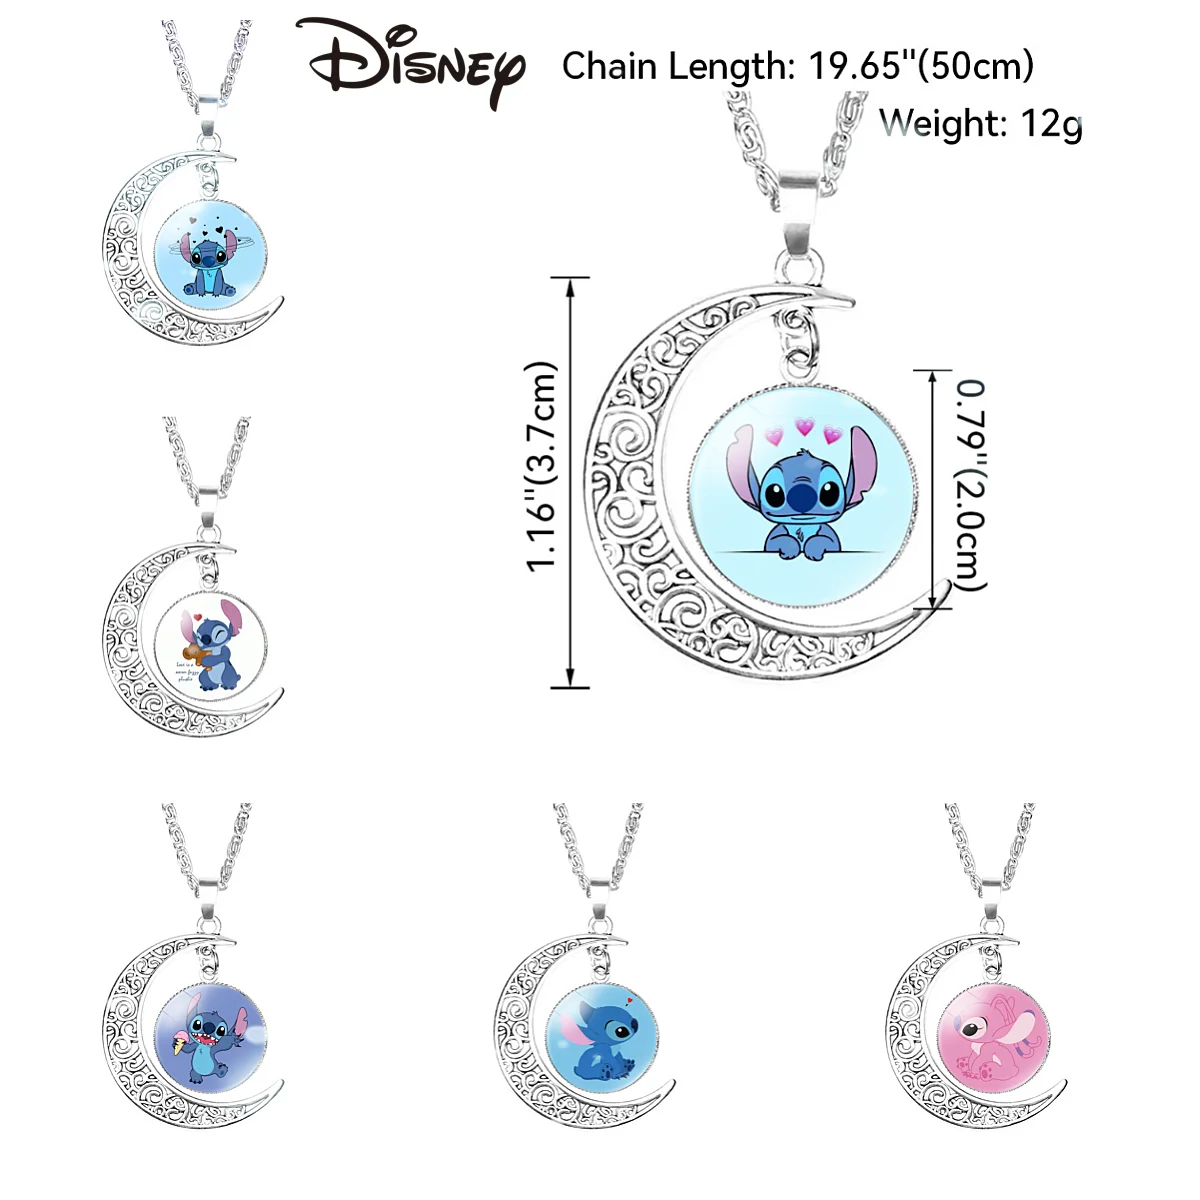 

Disney Stitch Necklace Action Anime Figures Stitch Angel Pendant Ornaments Cute Cartoon Ornaments Women's Jewelry Children Gifts